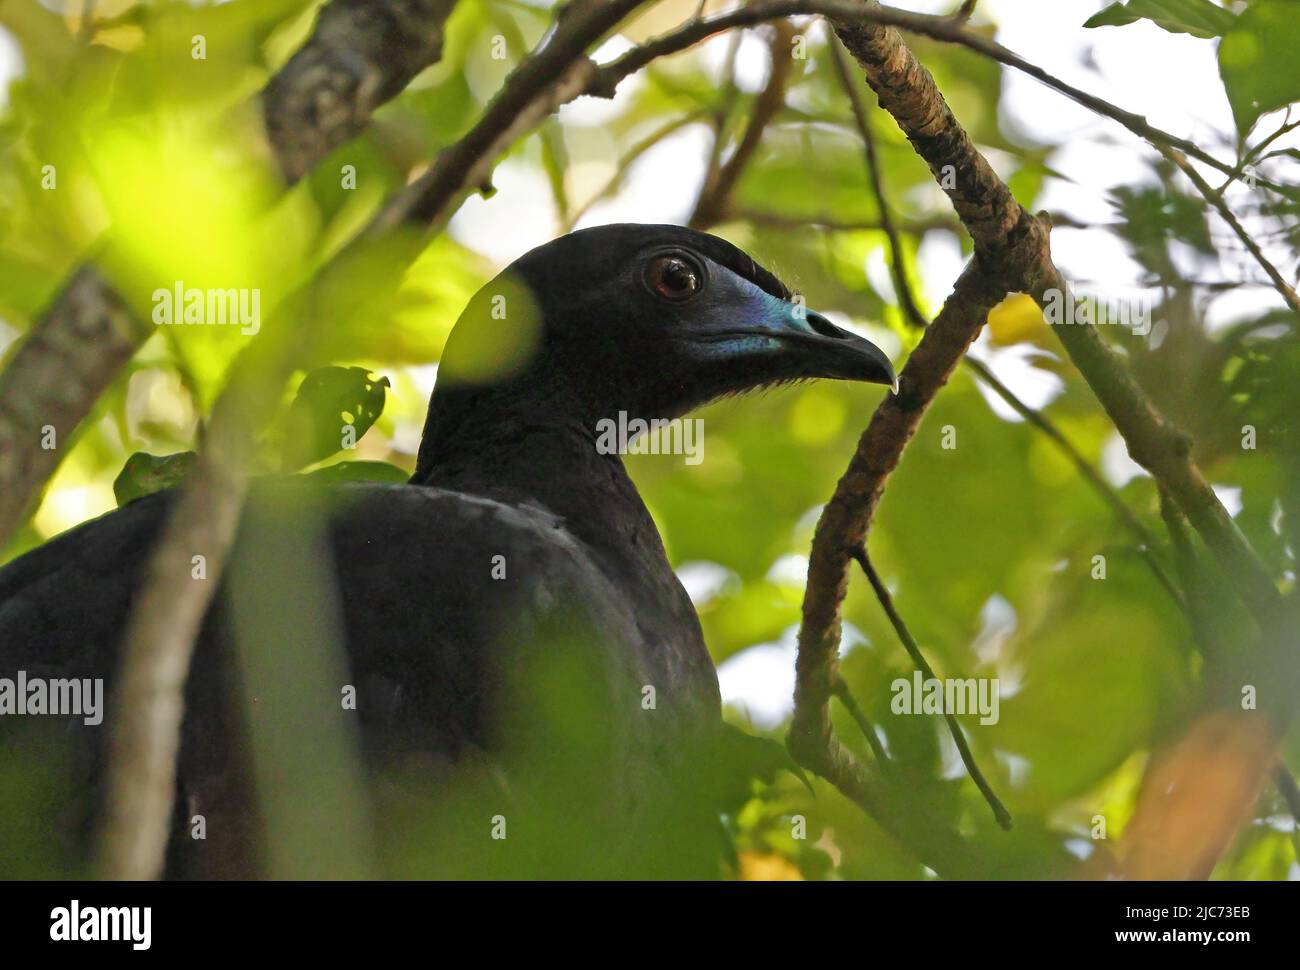 Black Guan (Chamaepetes unicolor) close-up of adult perched in tree             Monteverde, Costa Rica                   March Stock Photo